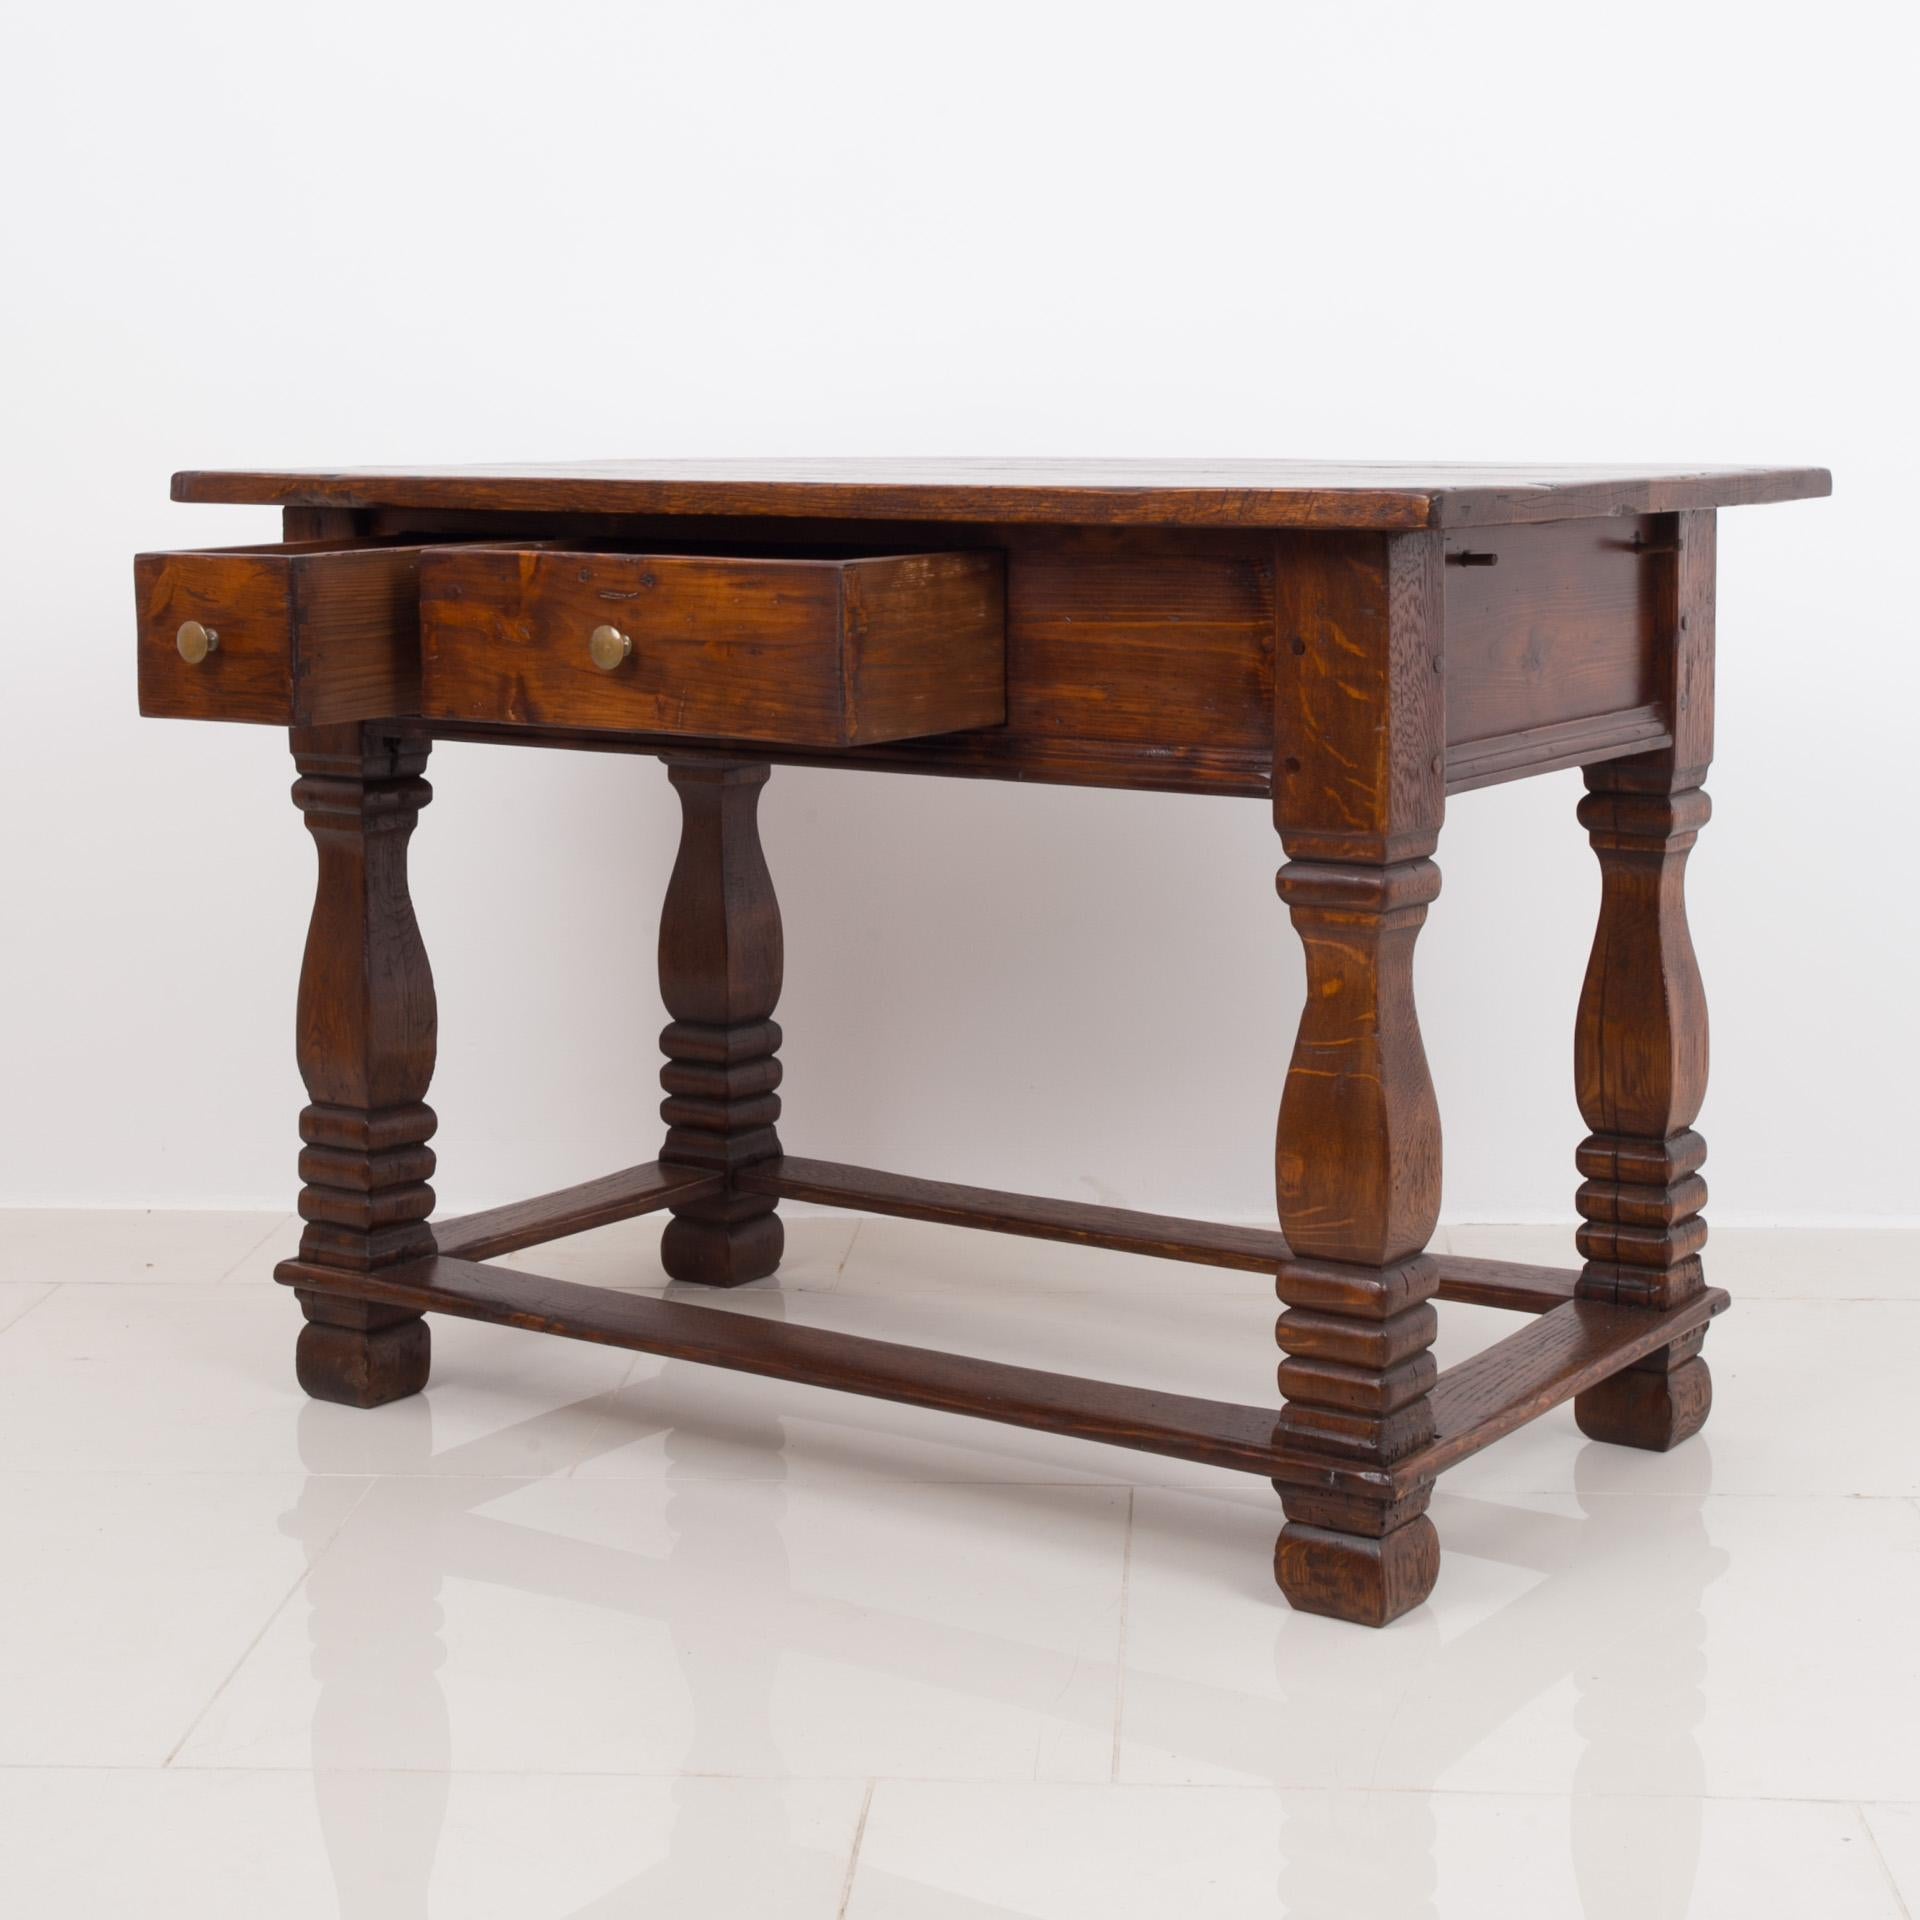 18th Century Solid Oak Table, 18th / 19th Century, Rustic Style, Prep or Dining Table